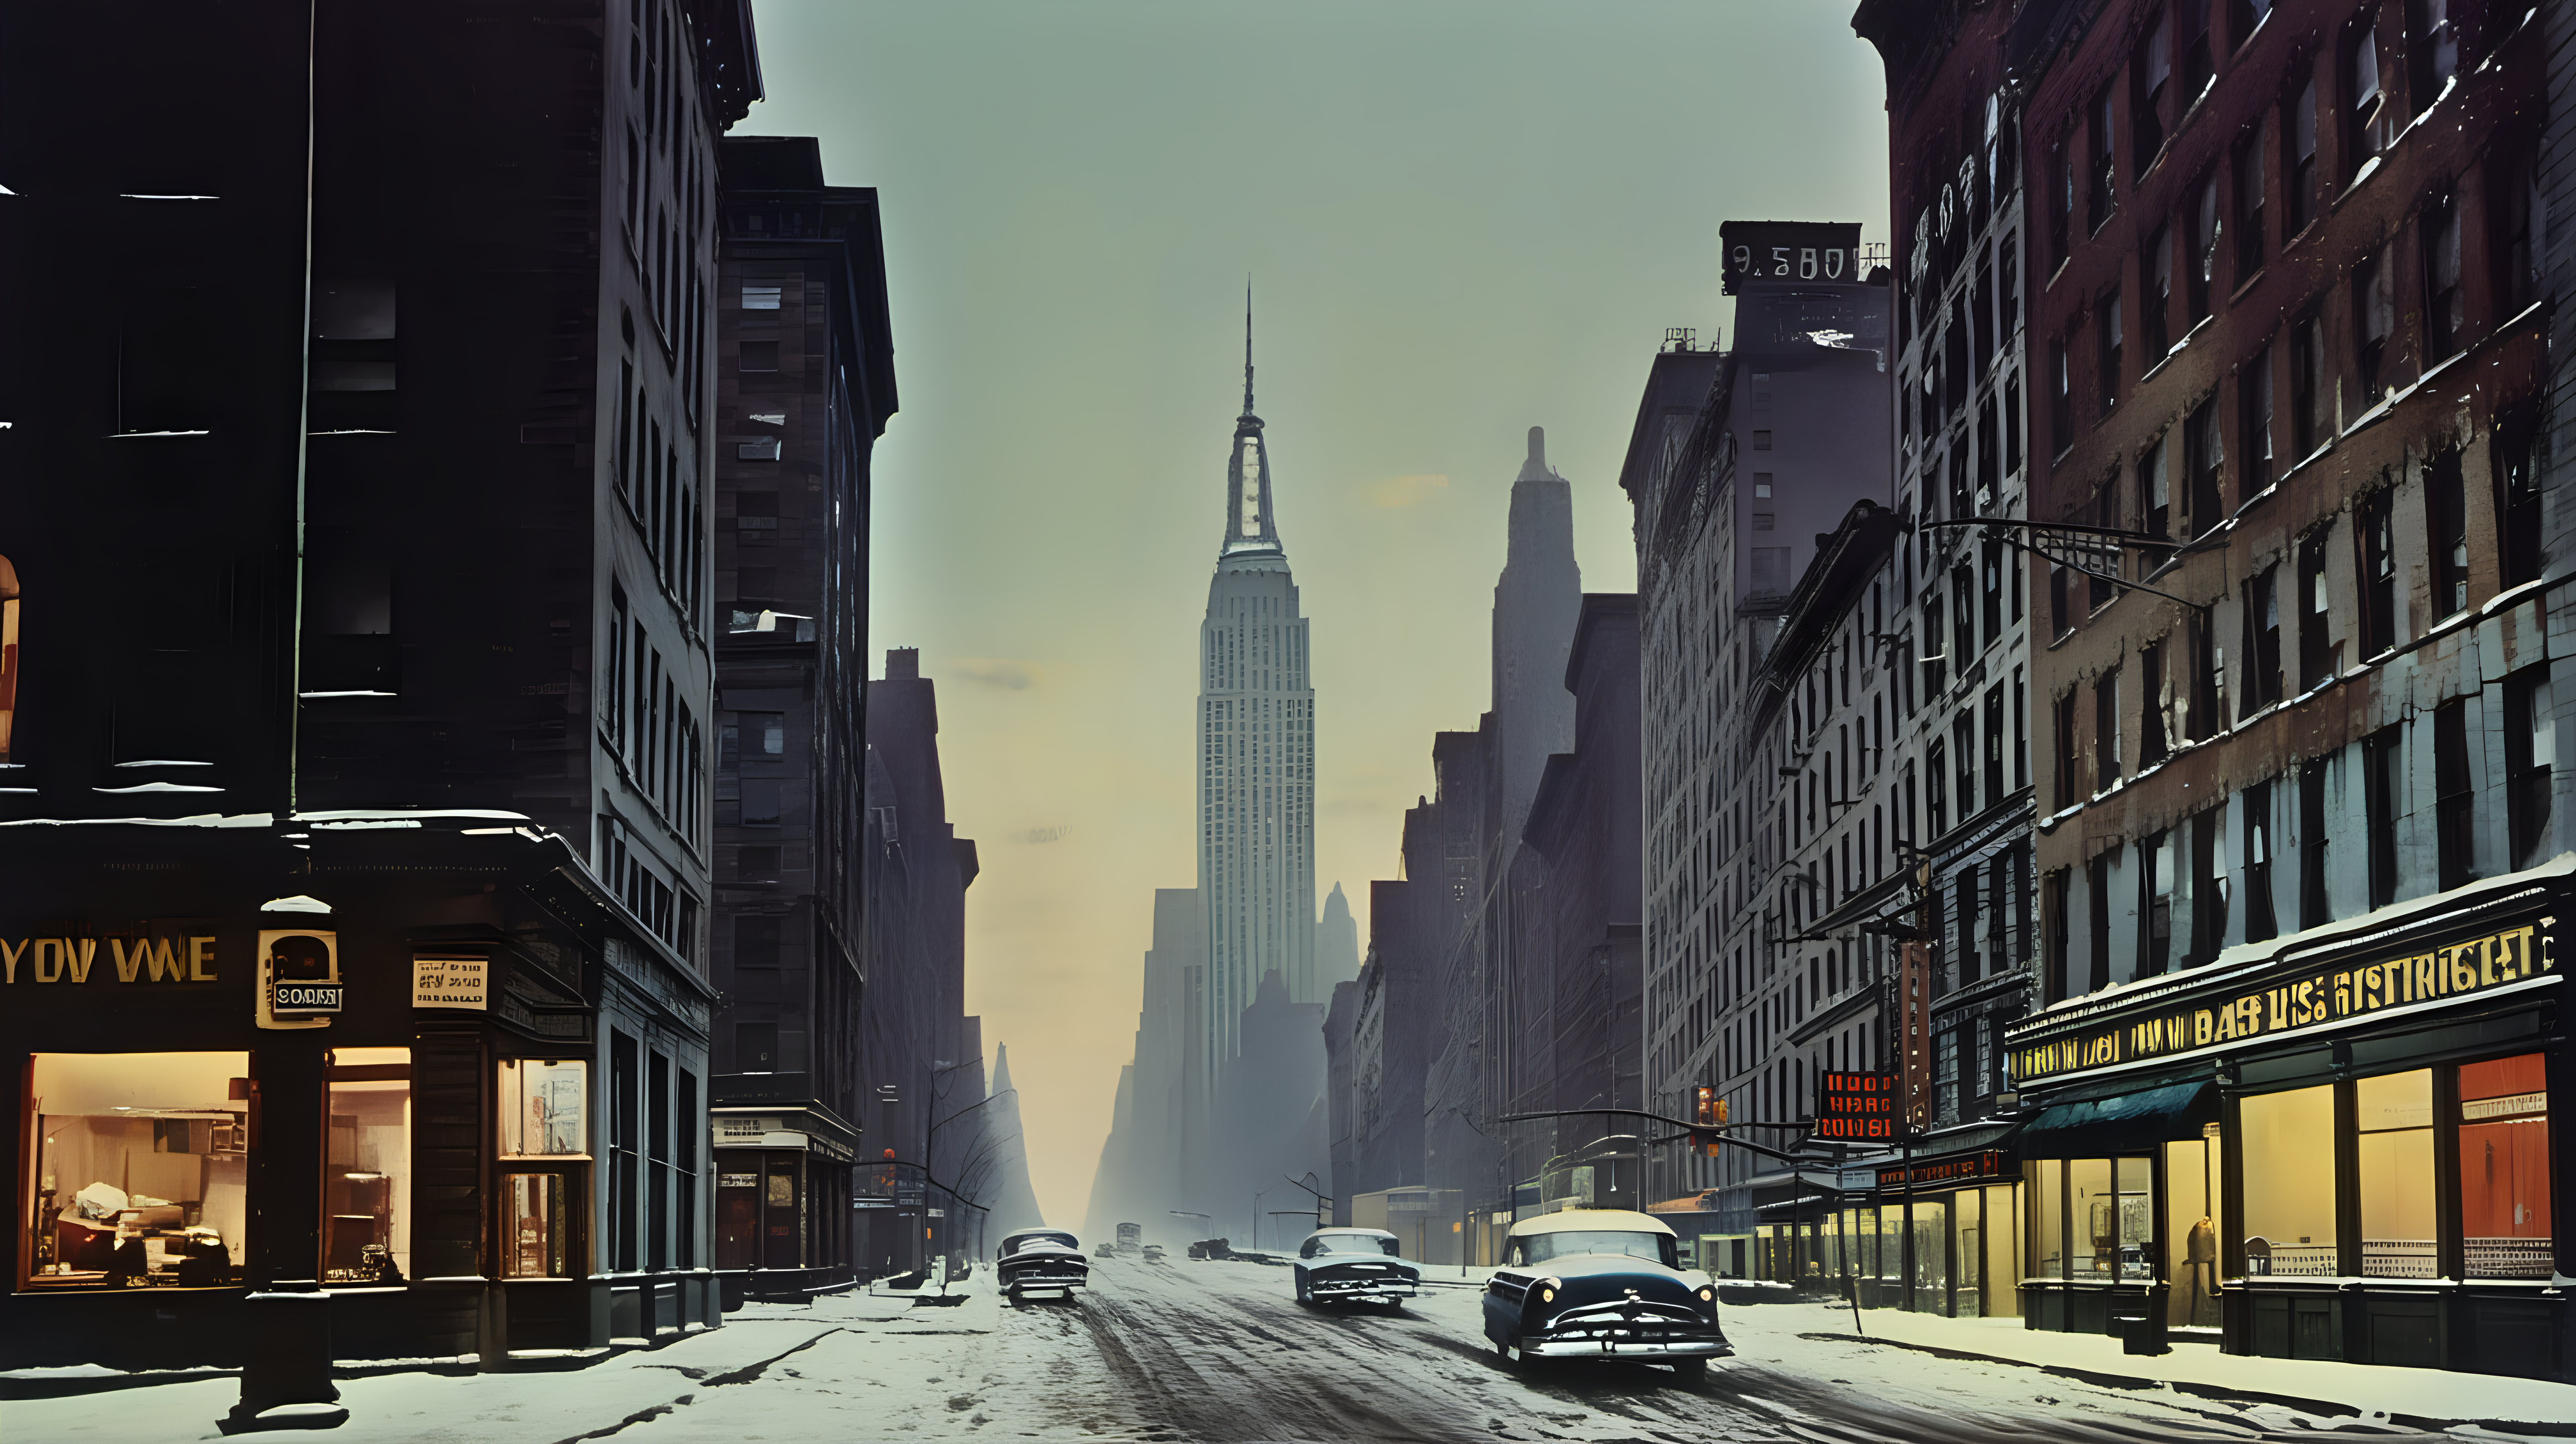 Deserted downtown New York City circa 1955 in